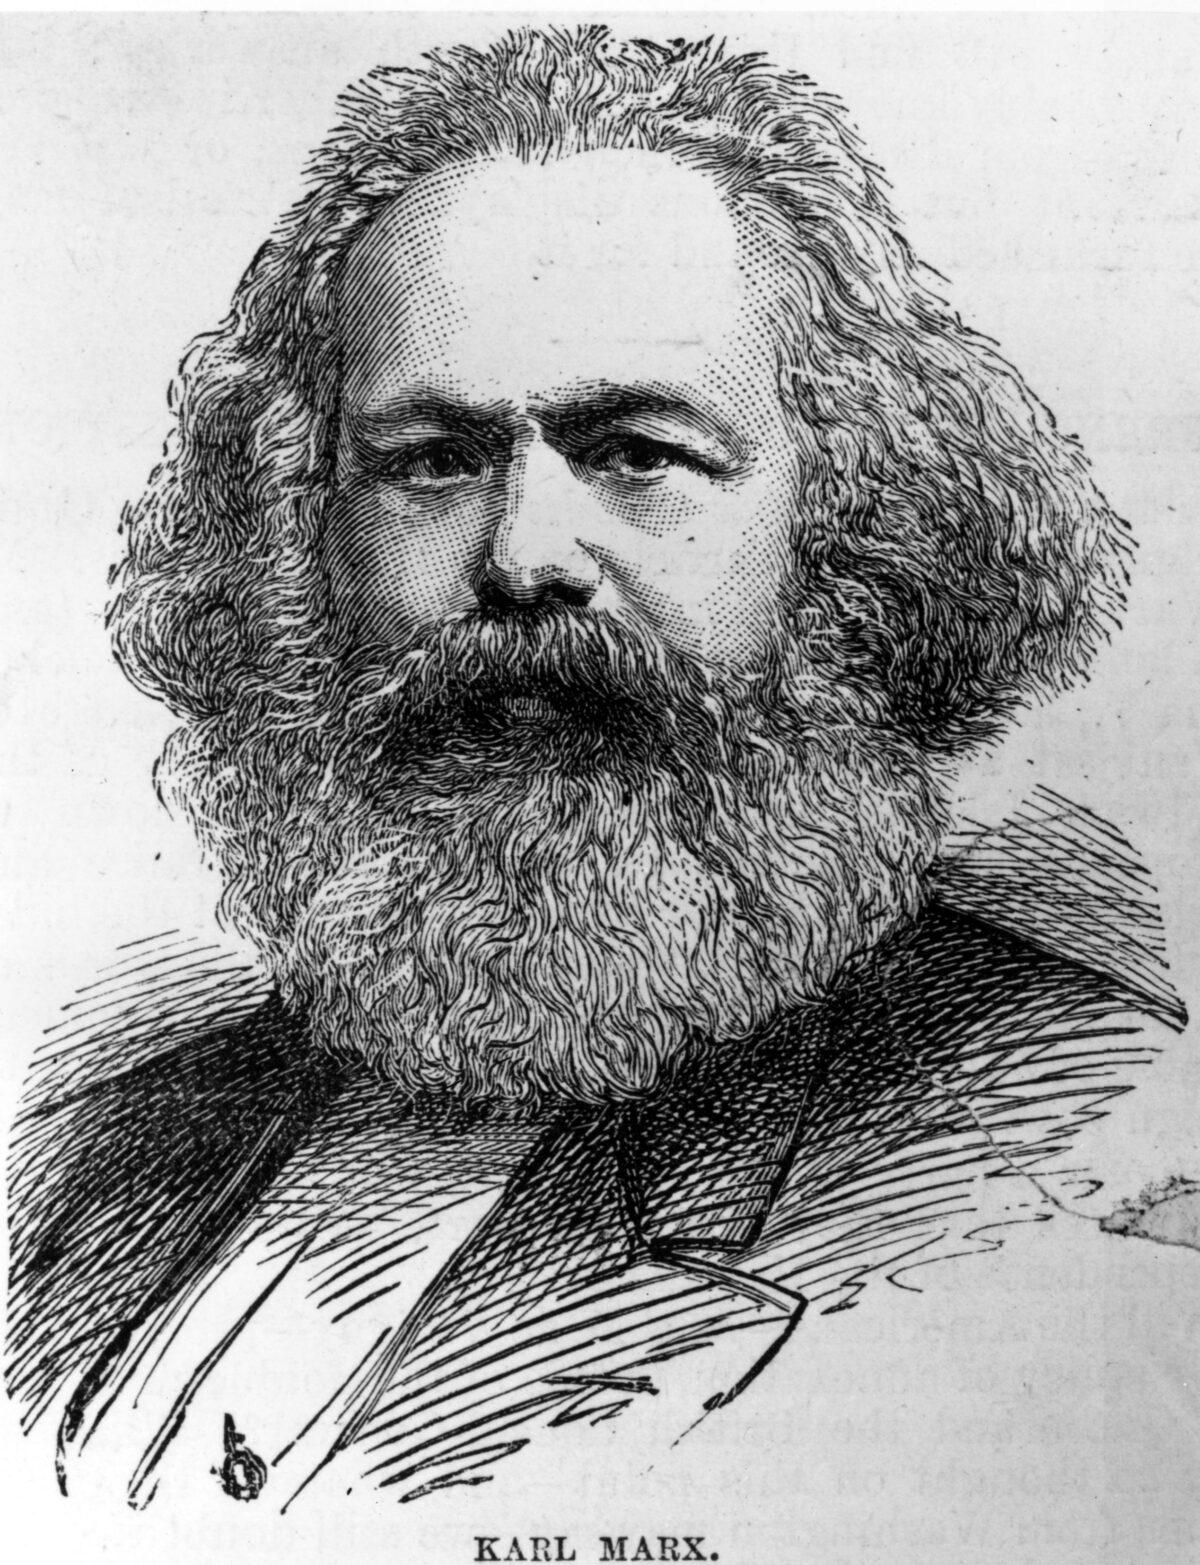 German social, political, and economic theorist Karl Marx. (Hulton Archive/Getty Images)